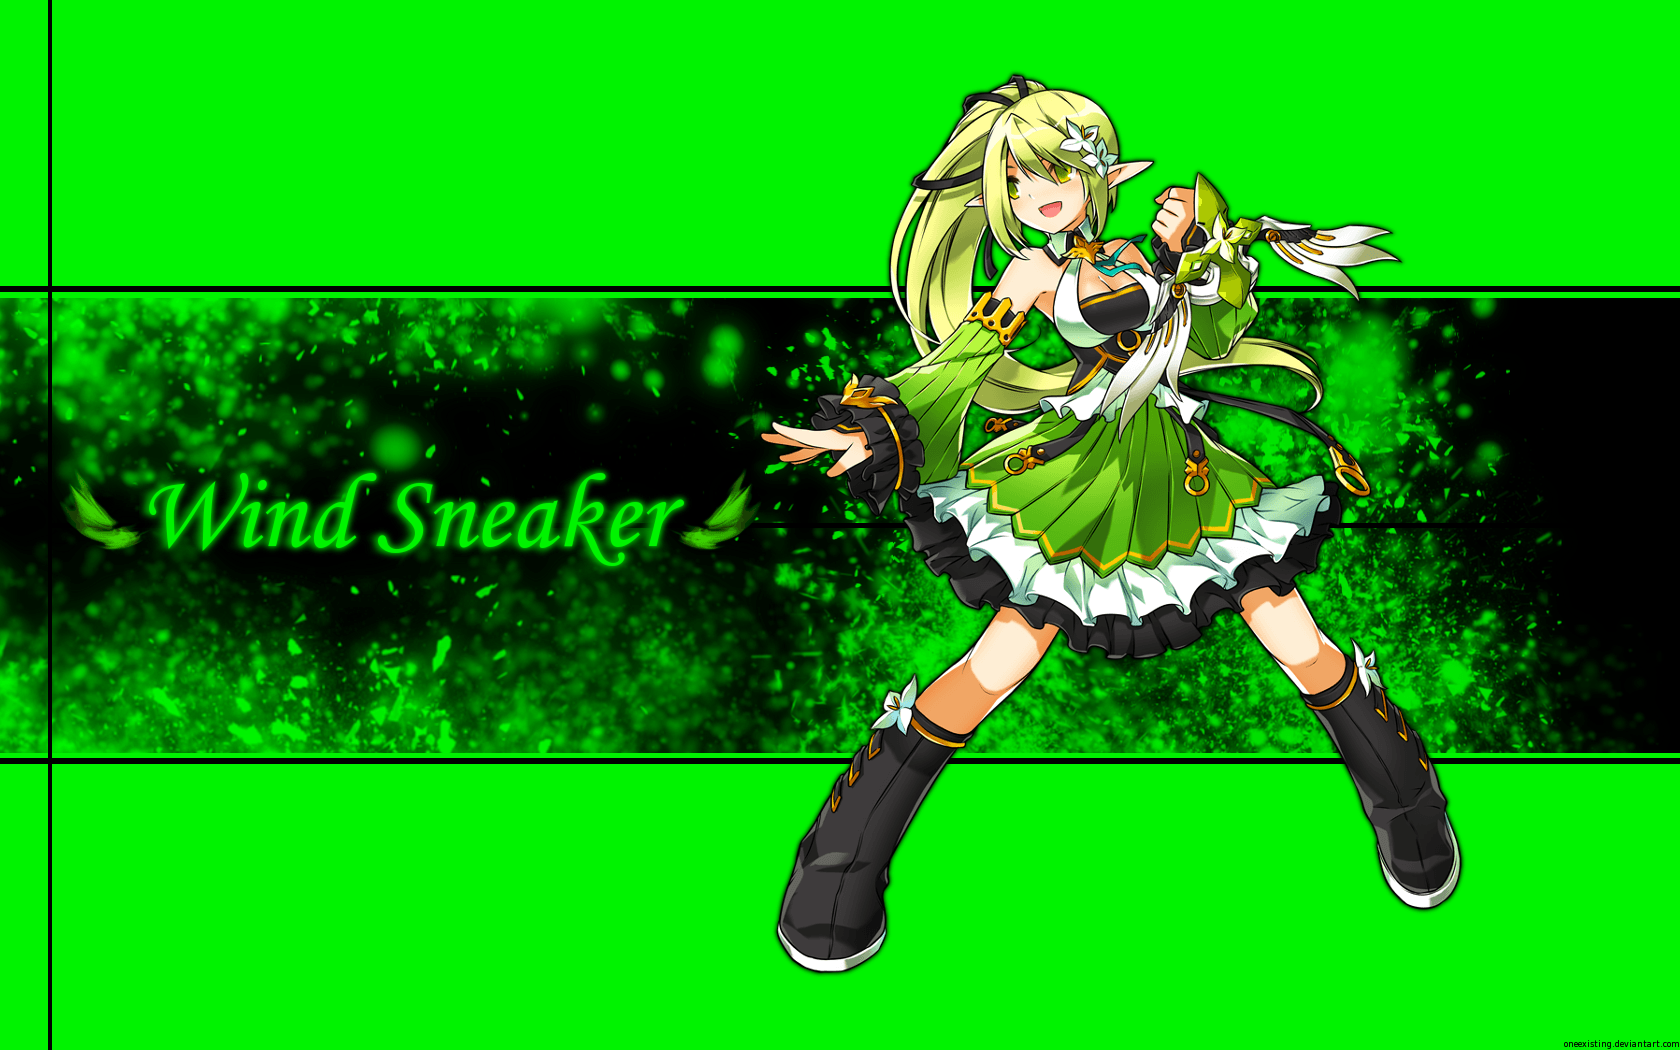 Wallpaper of Wind Sneaker with lettering